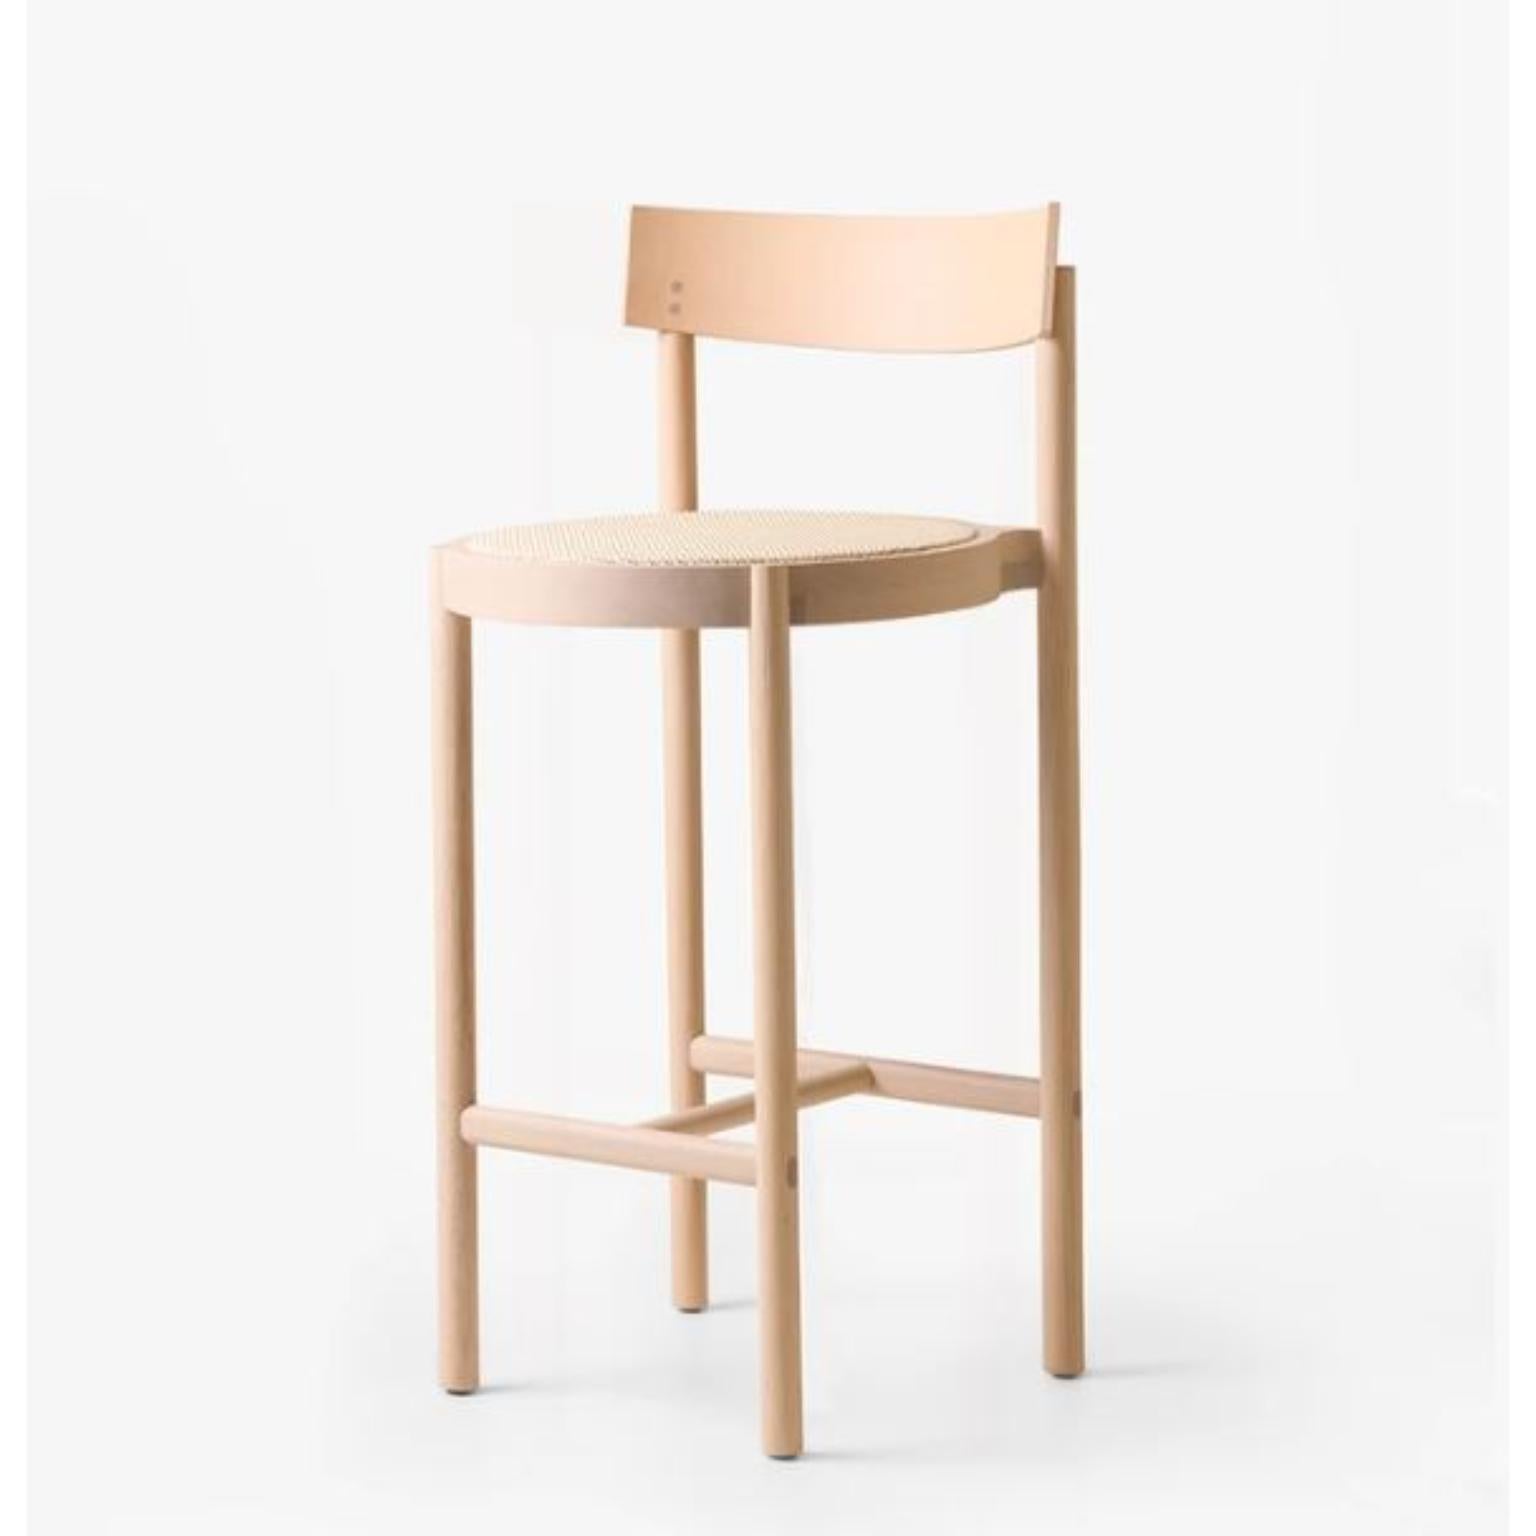 Bleached Tauari Gravatá Bar Stool by Wentz
Dimensions: D 52 x W 47 x H 100 cm
Materials: Tauari Wood, Cane/Upholstery.
Weight: 4,7kg / 10,4 lbs

The Gravatá series synthesizes our vision regarding the functional and visual simplicity of furniture.